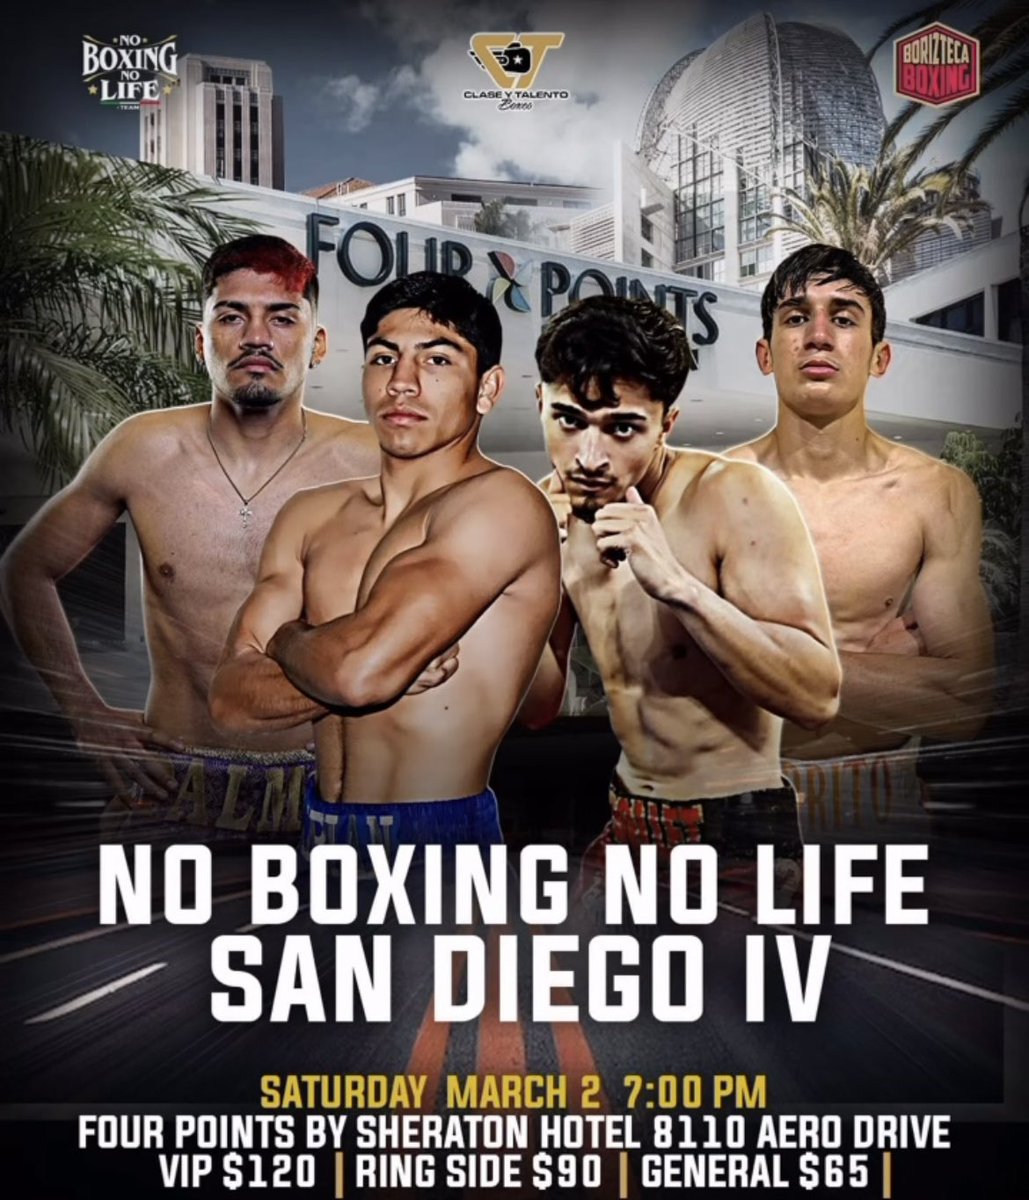 If you are in the SoCal area on Saturday night, and want to see some great club fight action…
#boxing #SanDiego #NoBoxingNoLife